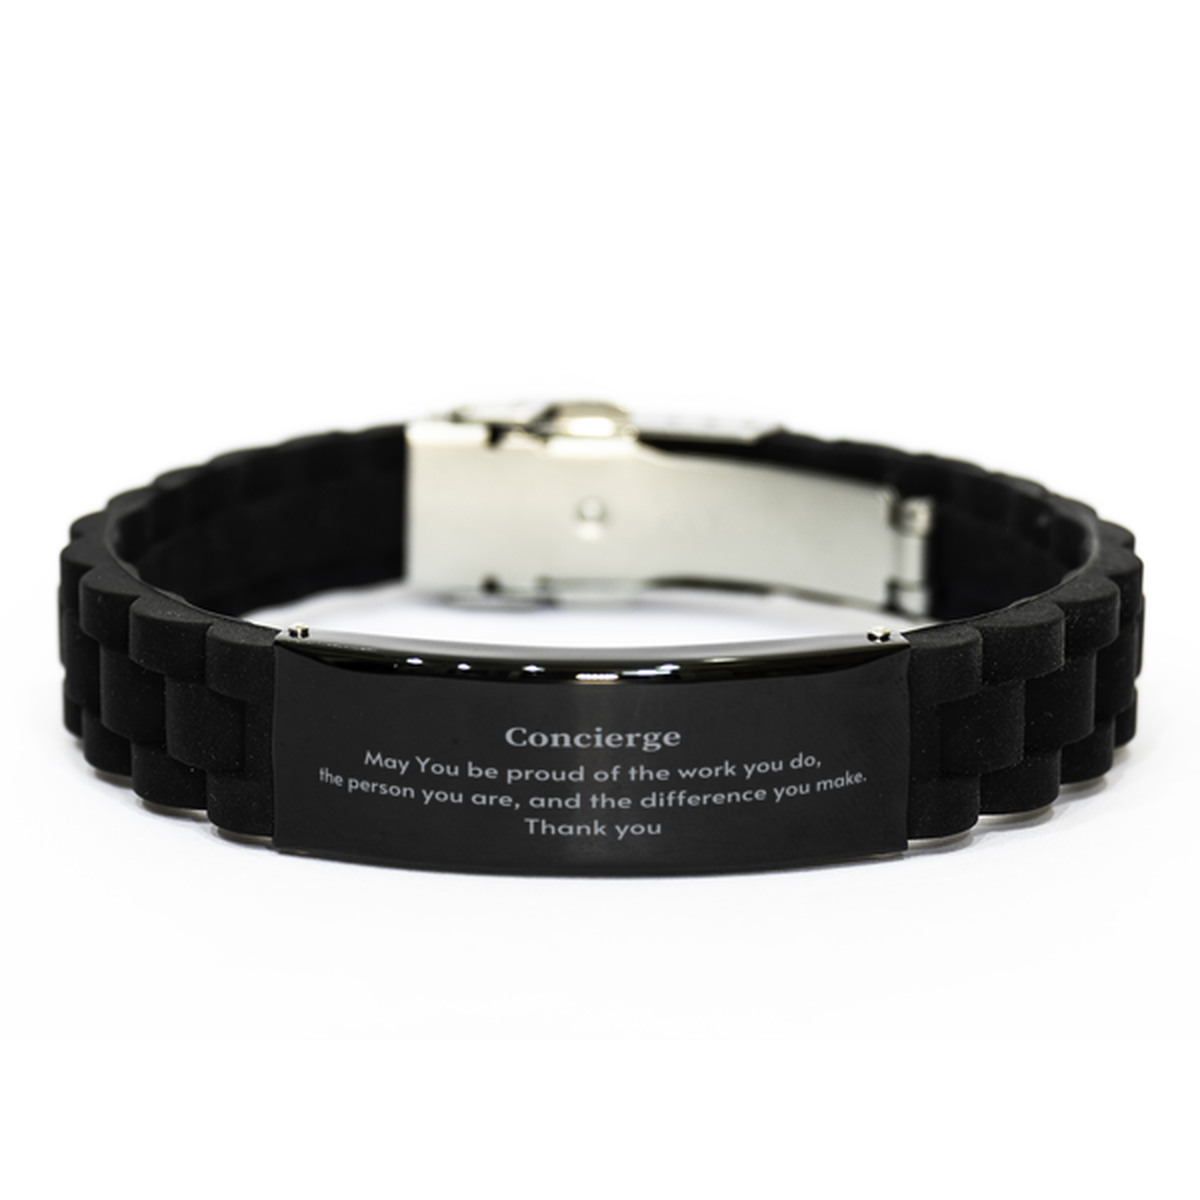 Heartwarming Black Glidelock Clasp Bracelet Retirement Coworkers Gifts for Concierge, Concierge May You be proud of the work you do, the person you are Gifts for Boss Men Women Friends